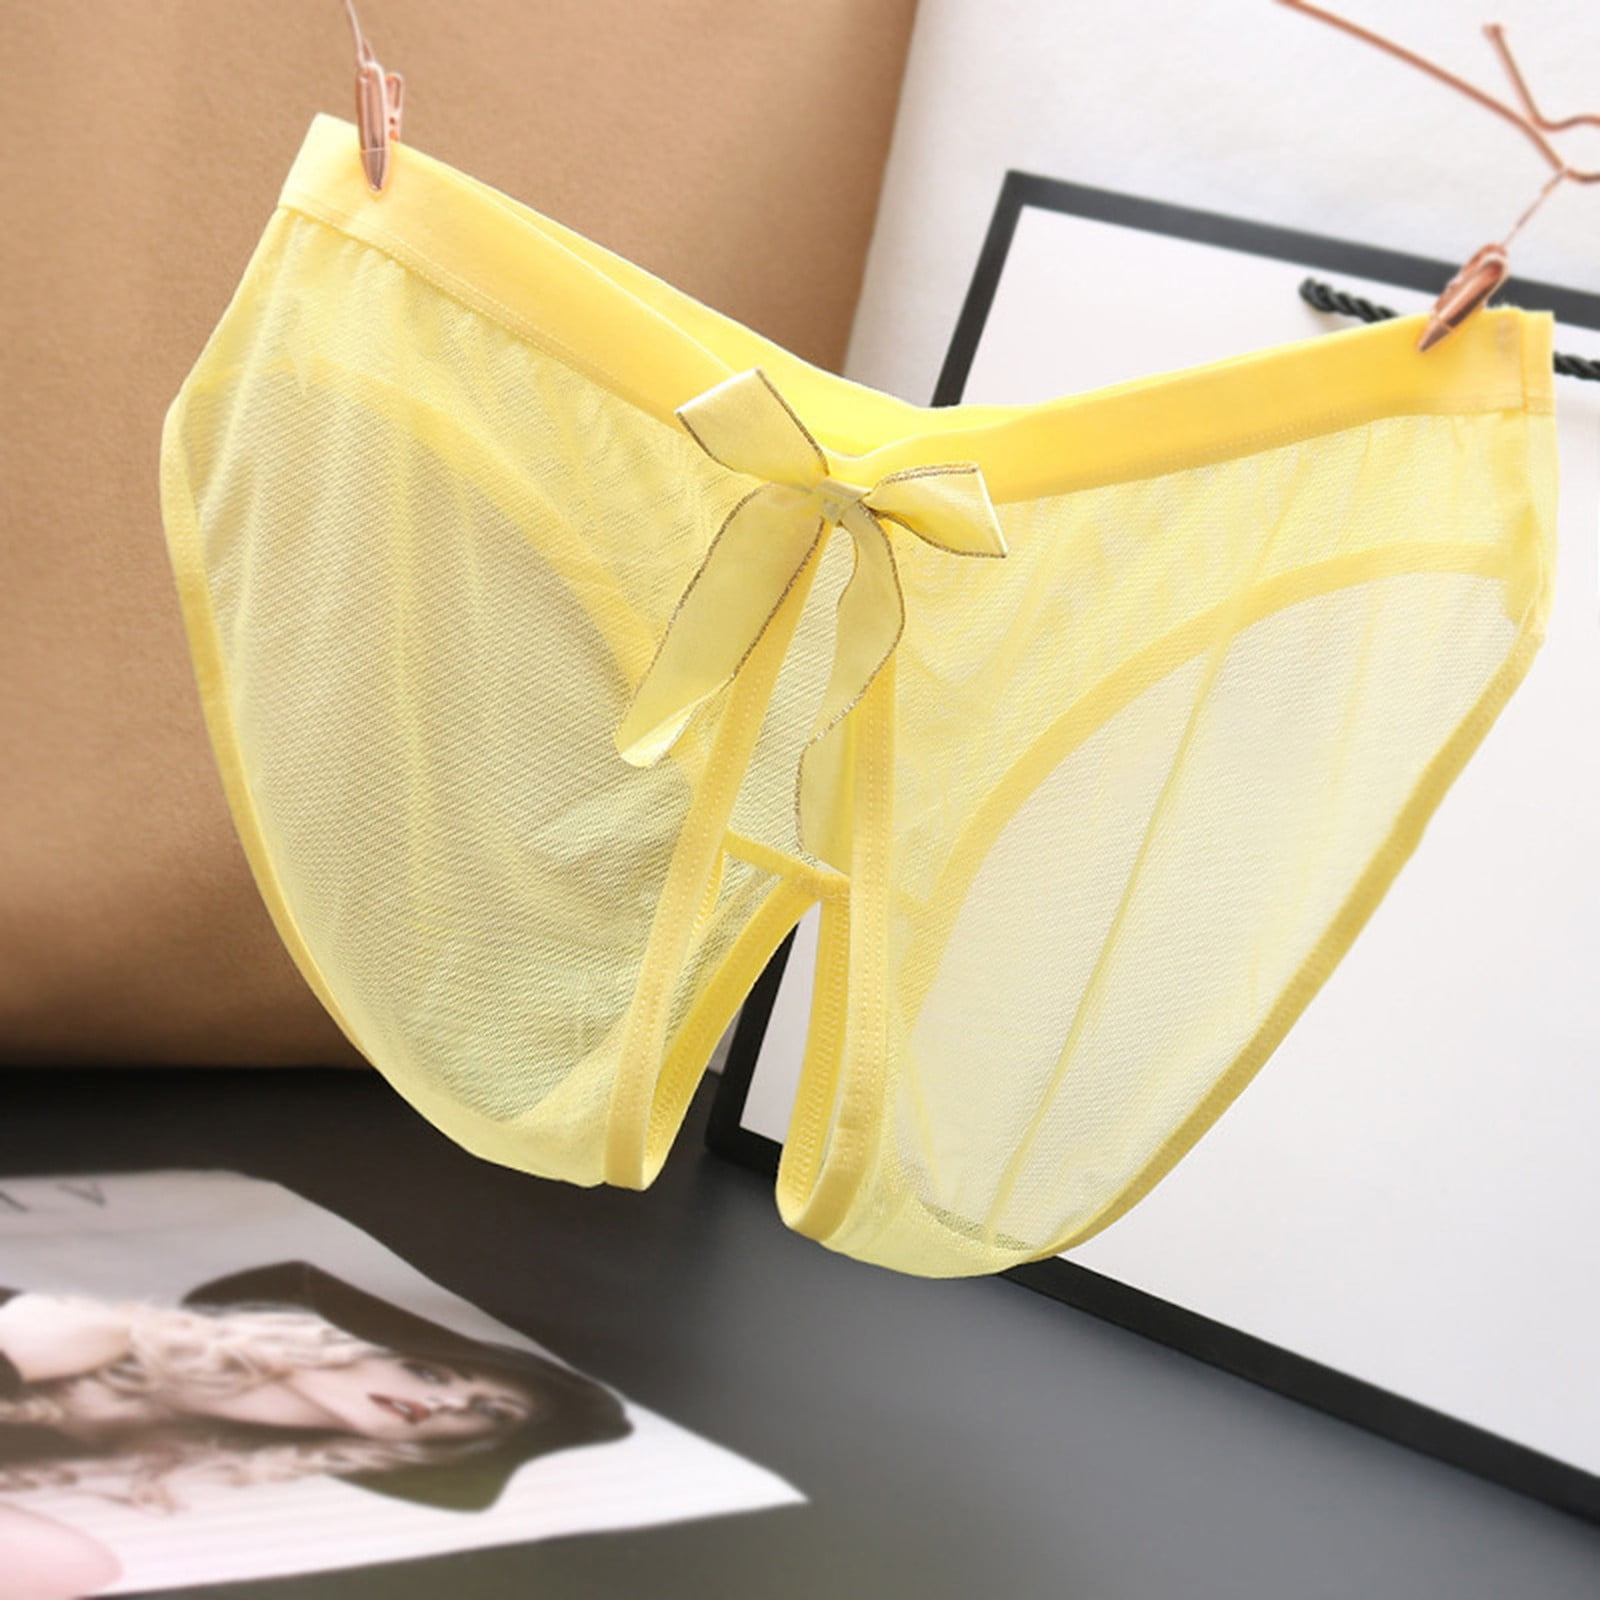 Mother's Day Tawop Pants Underwear Women Sexy Underwear Lingerie Thongs  Panties Ladies Underwear Underpants Yellow One Size 